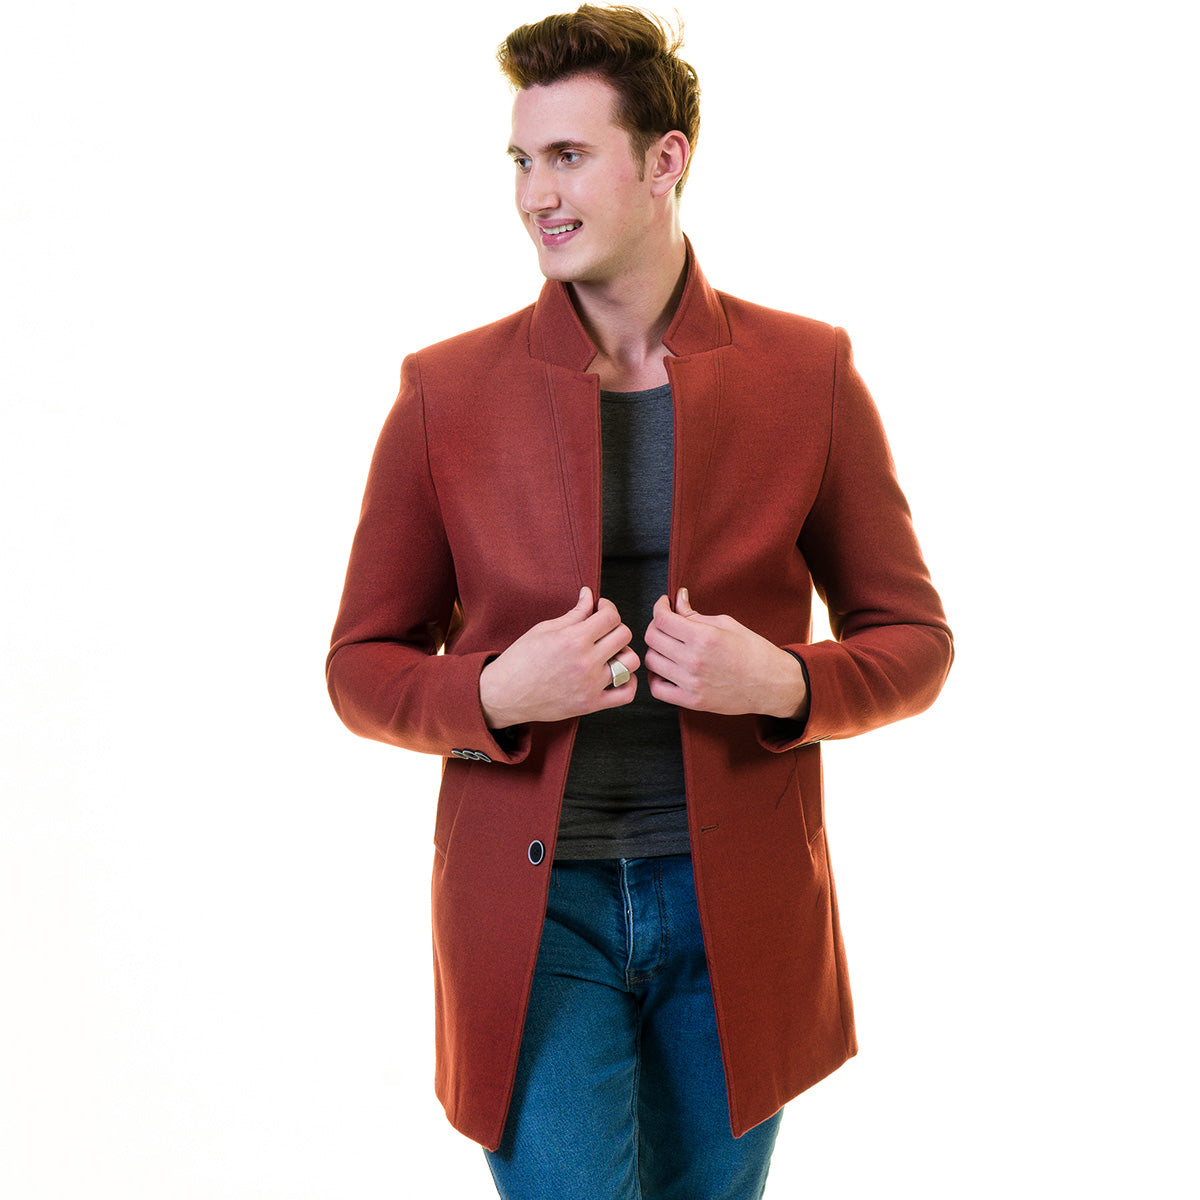 Men's European Maroon Wool Coat Jacket Tailor fit Fine Luxury Quality Work and Casual